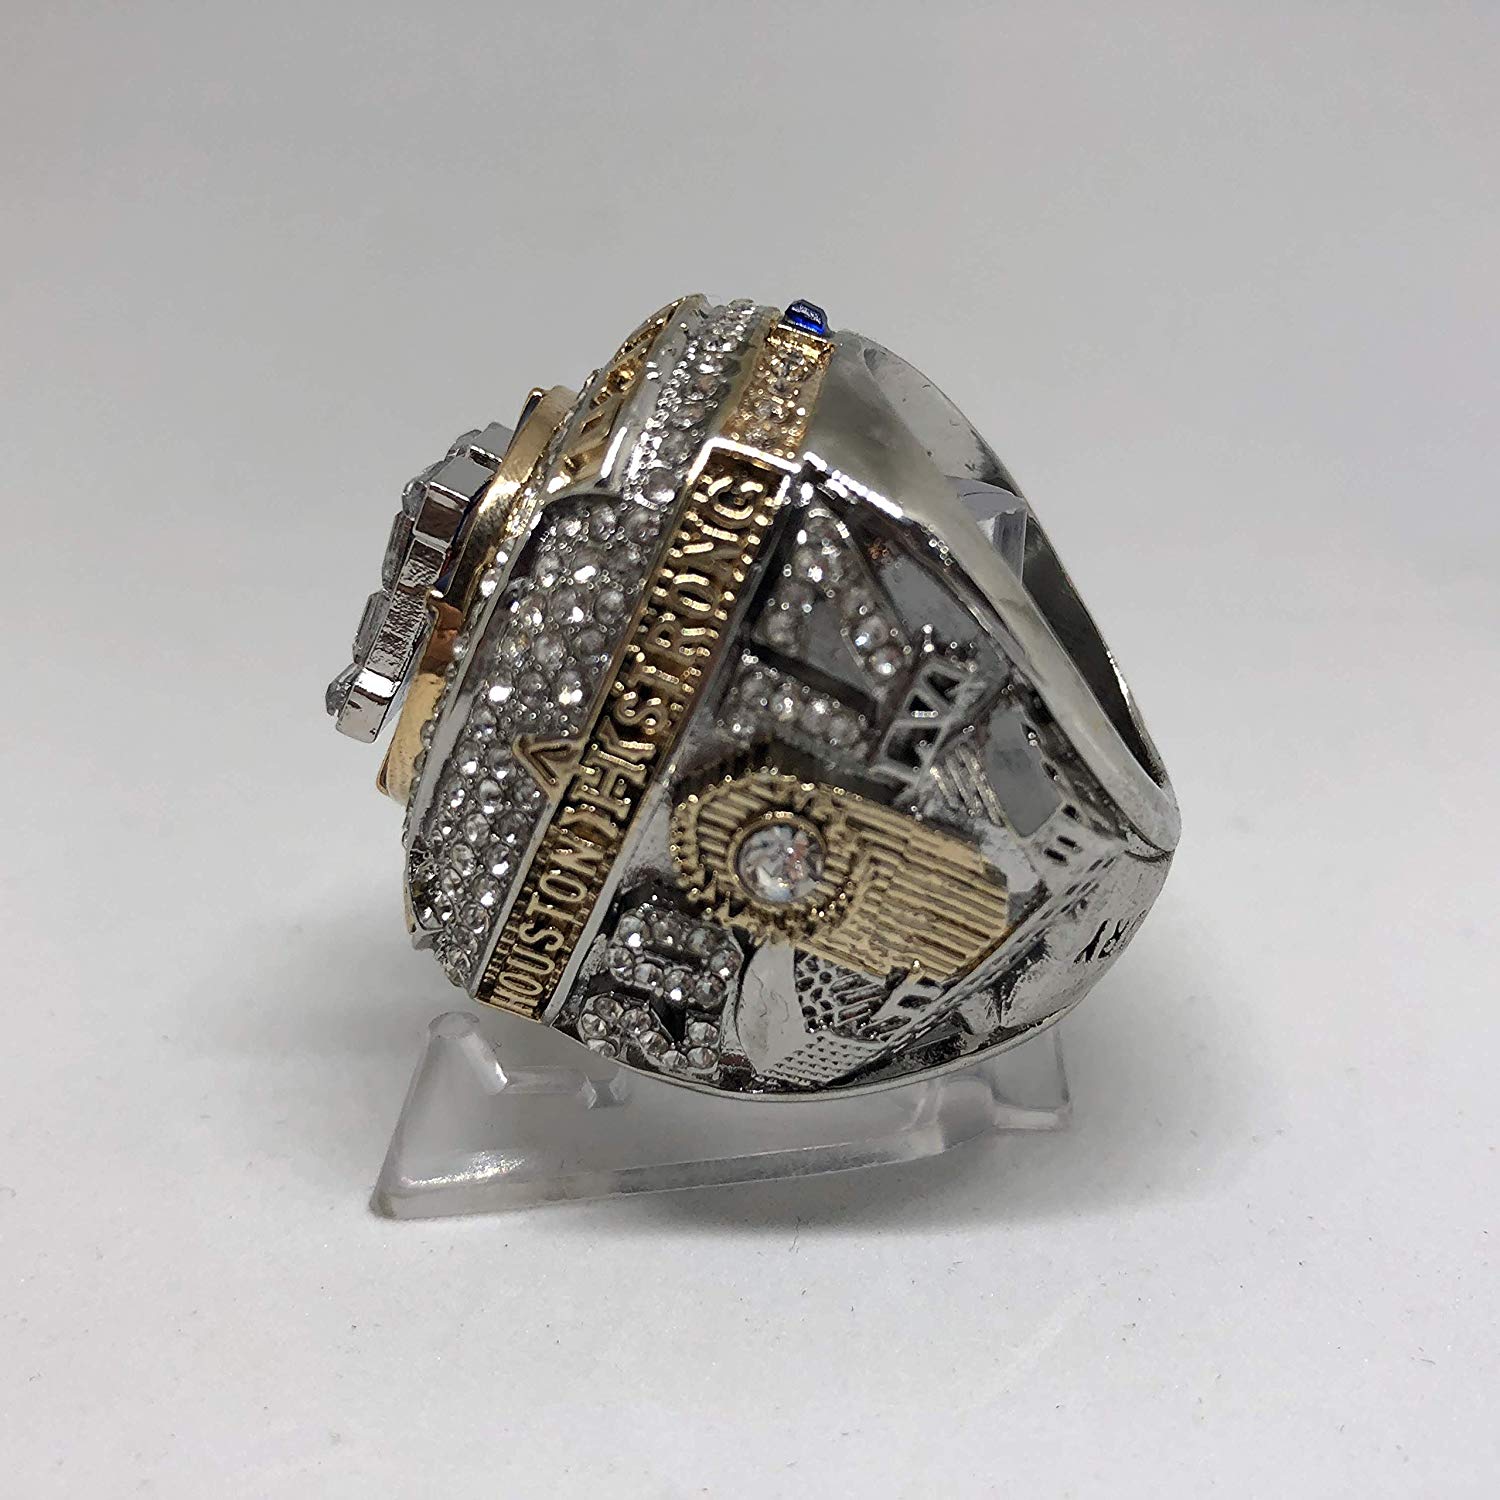 At Auction: HOUSTON ASTROS 2017 REPLICA WORLD SERIES RING